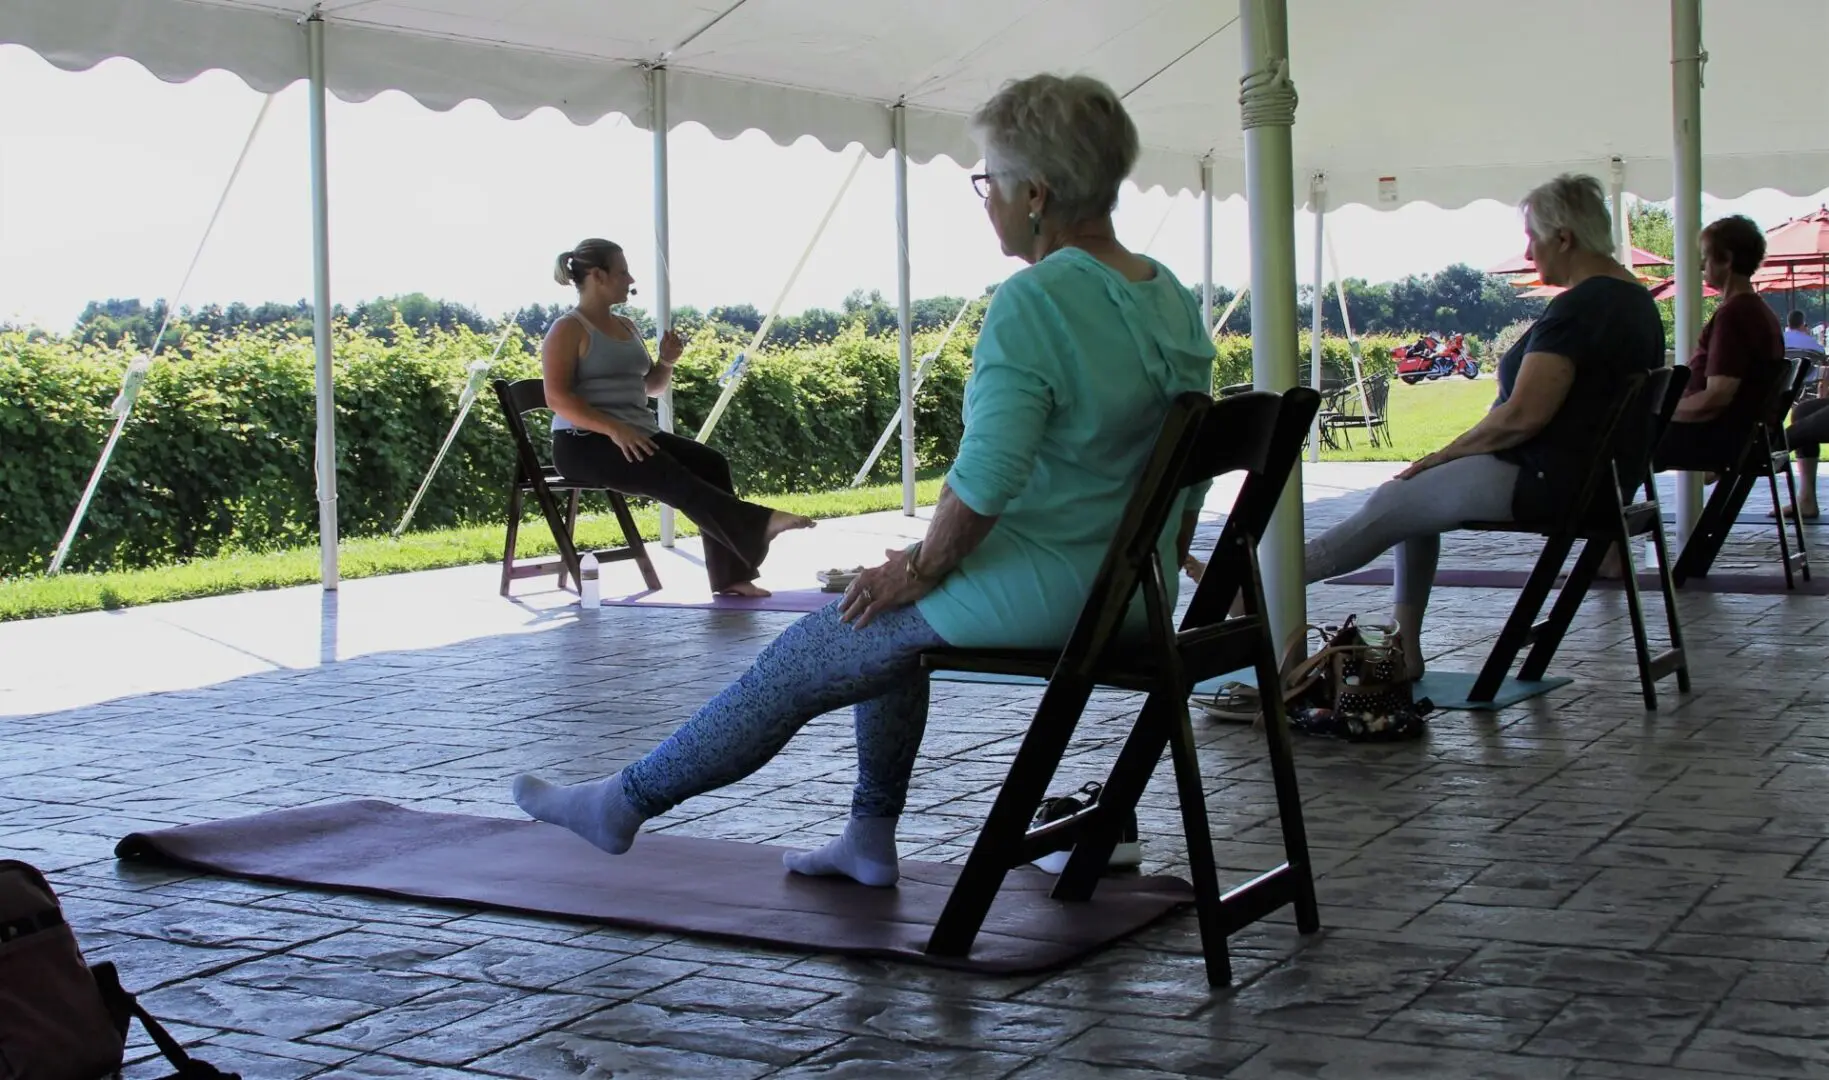 Three women stretching in chairs under tent.